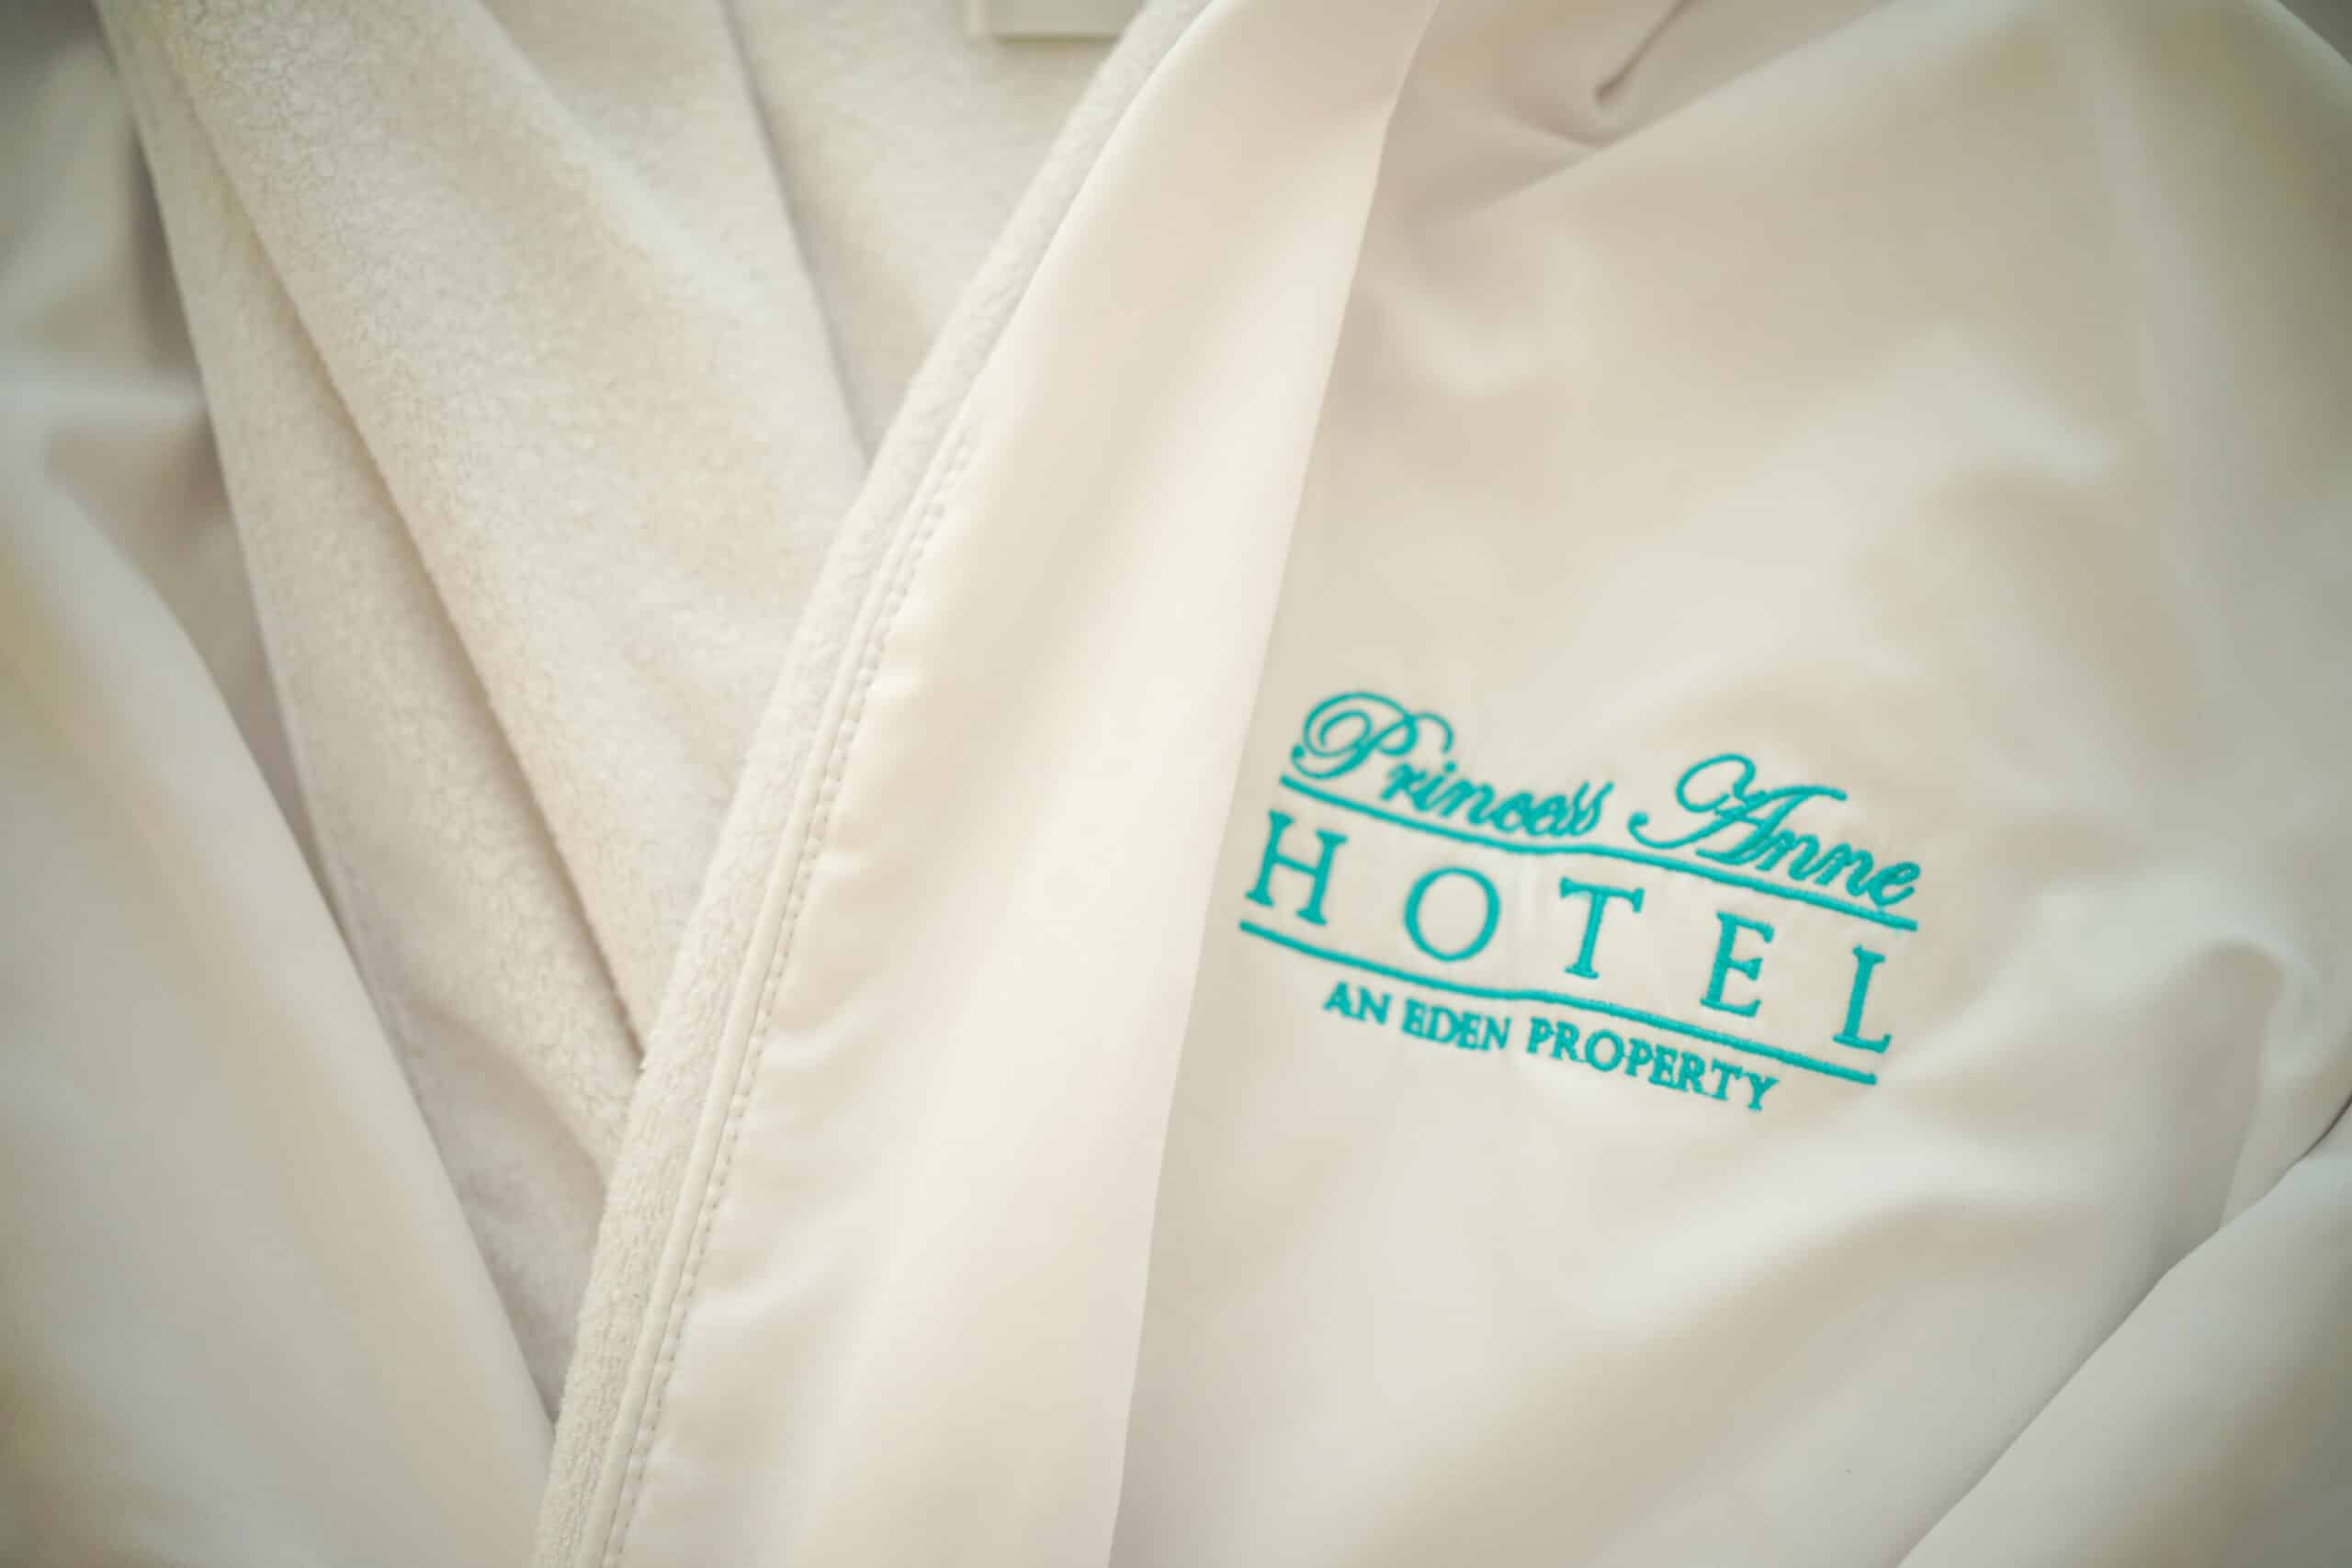 Luxurious and comfy robes at Princess Anne Hotel